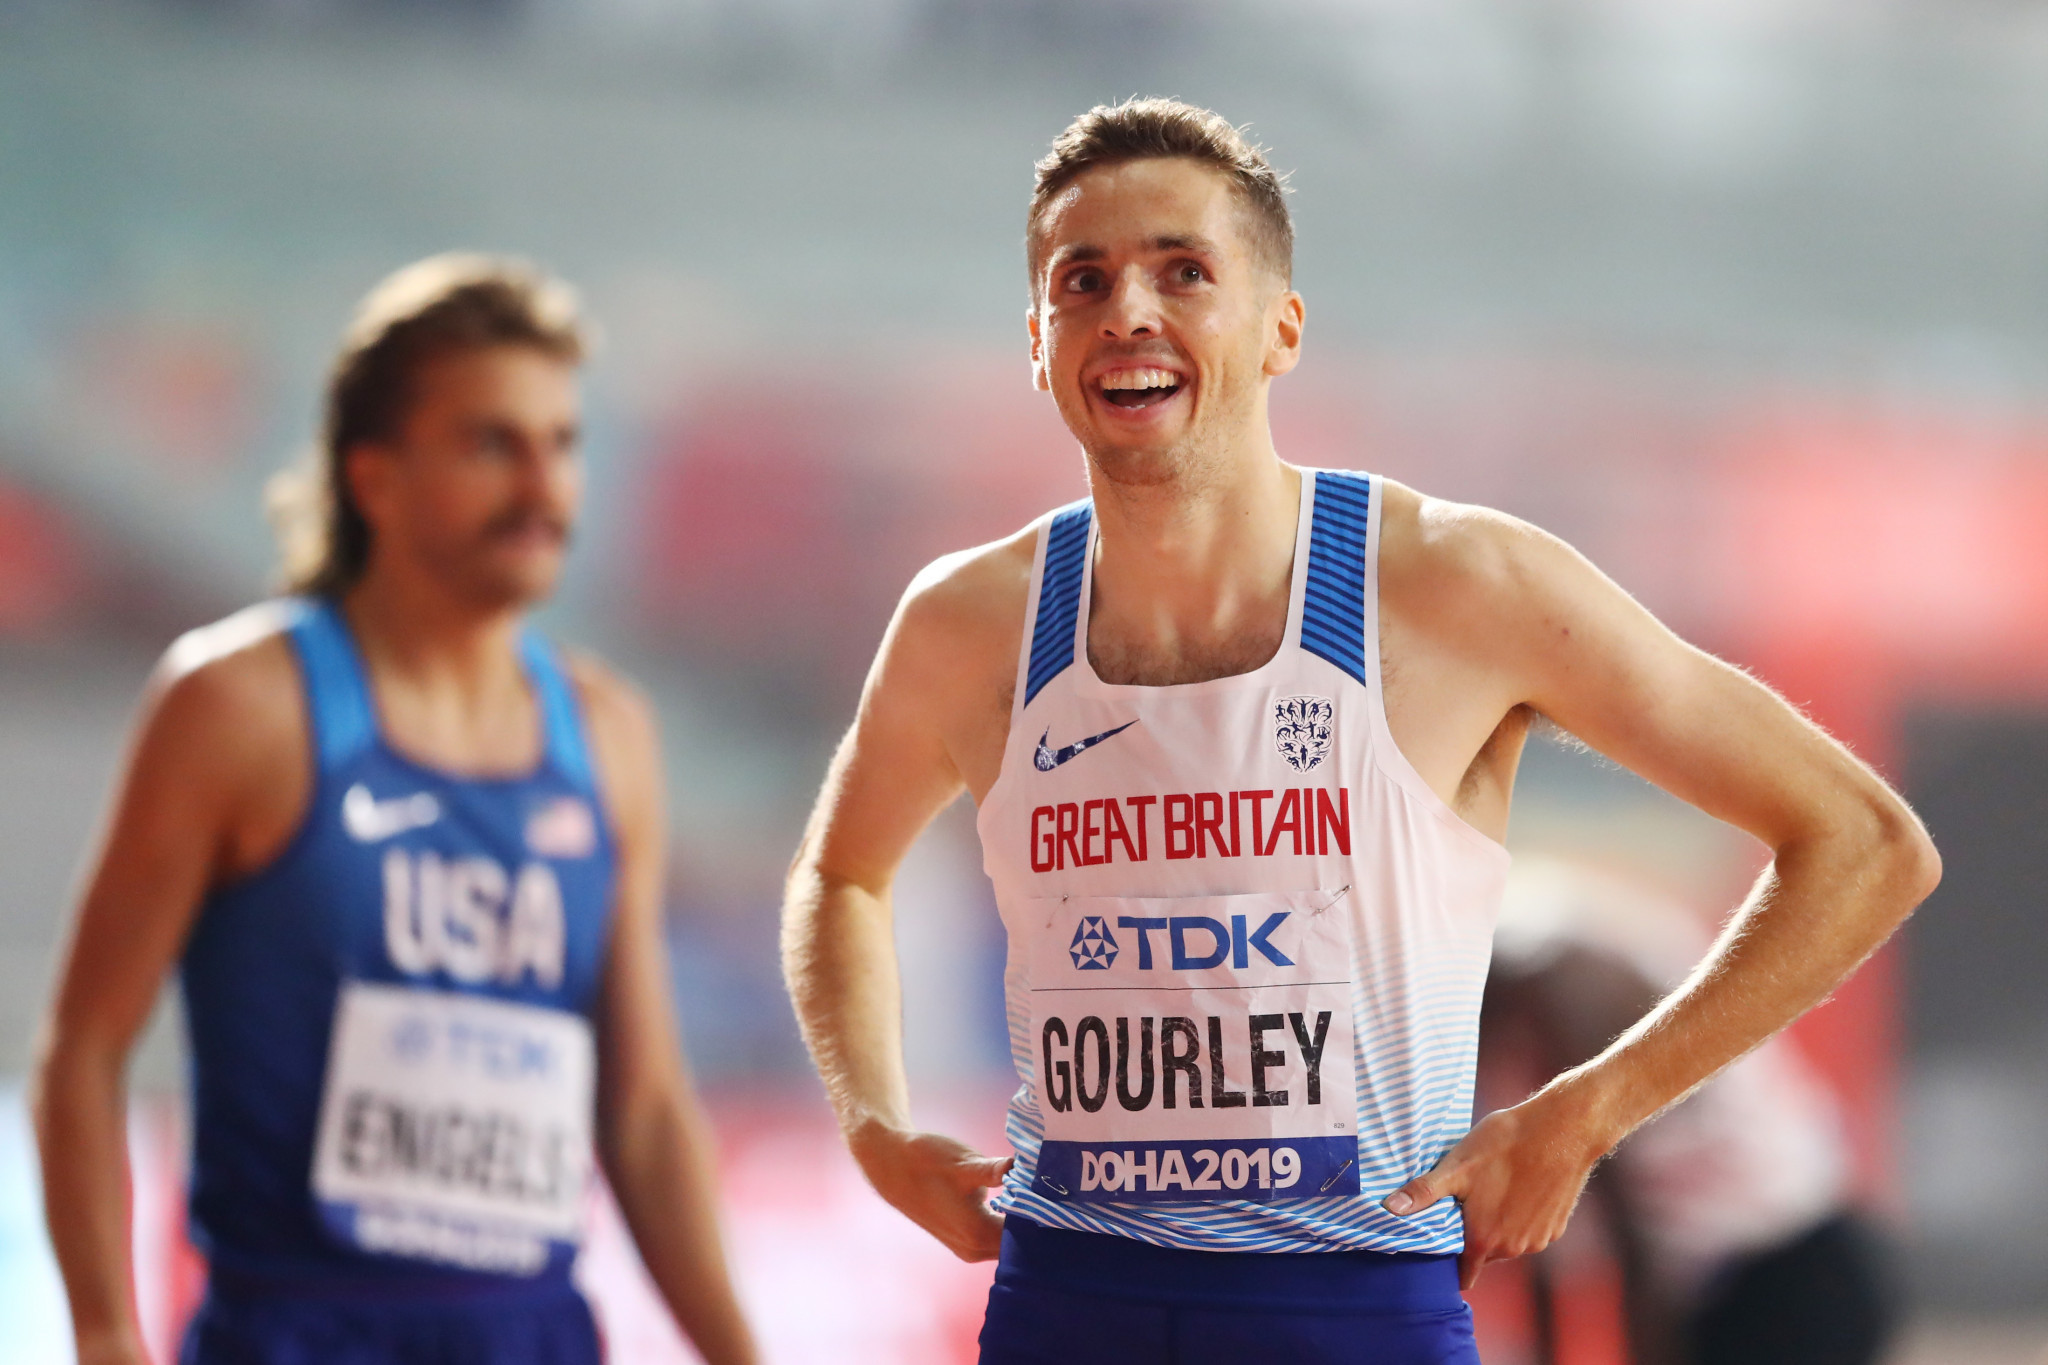 Neil Gourley has confirmed he will not be able to compete at Tokyo 2020 ©Getty Images